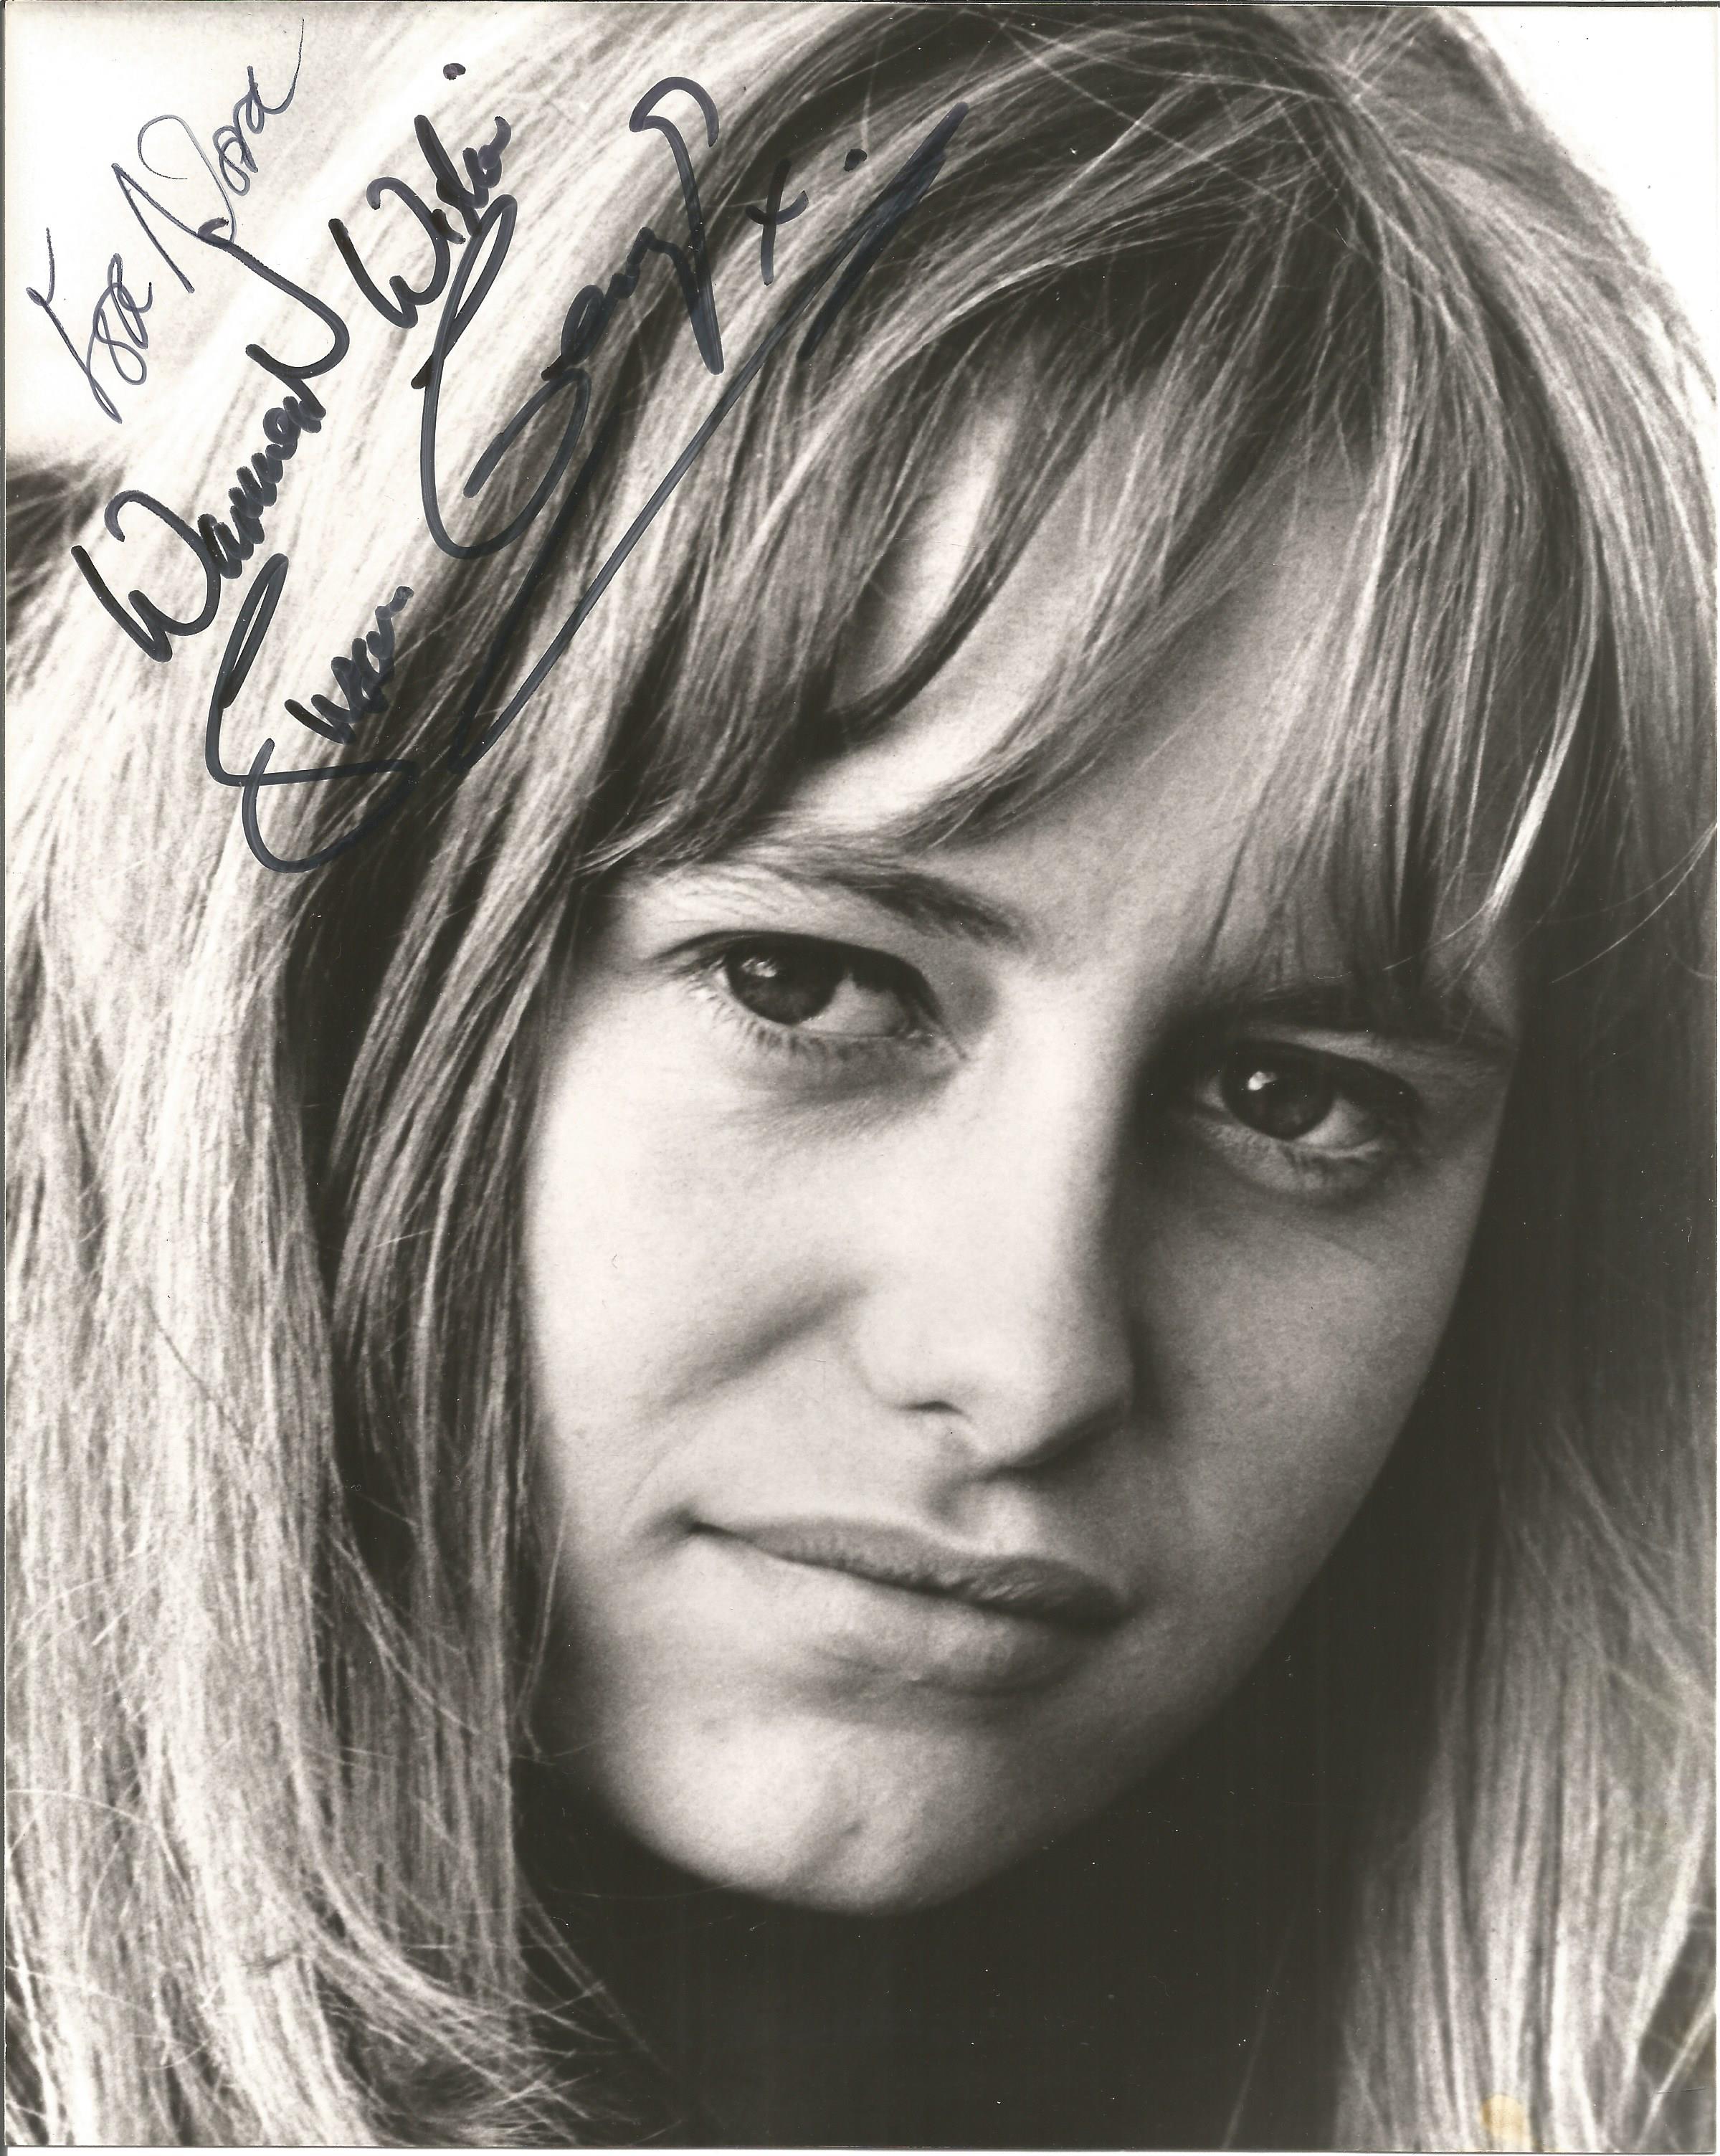 Billy Whitelaw, Julie Christie, Susan George, Nyree Dawn Porter. 4 signed photos. Good condition.